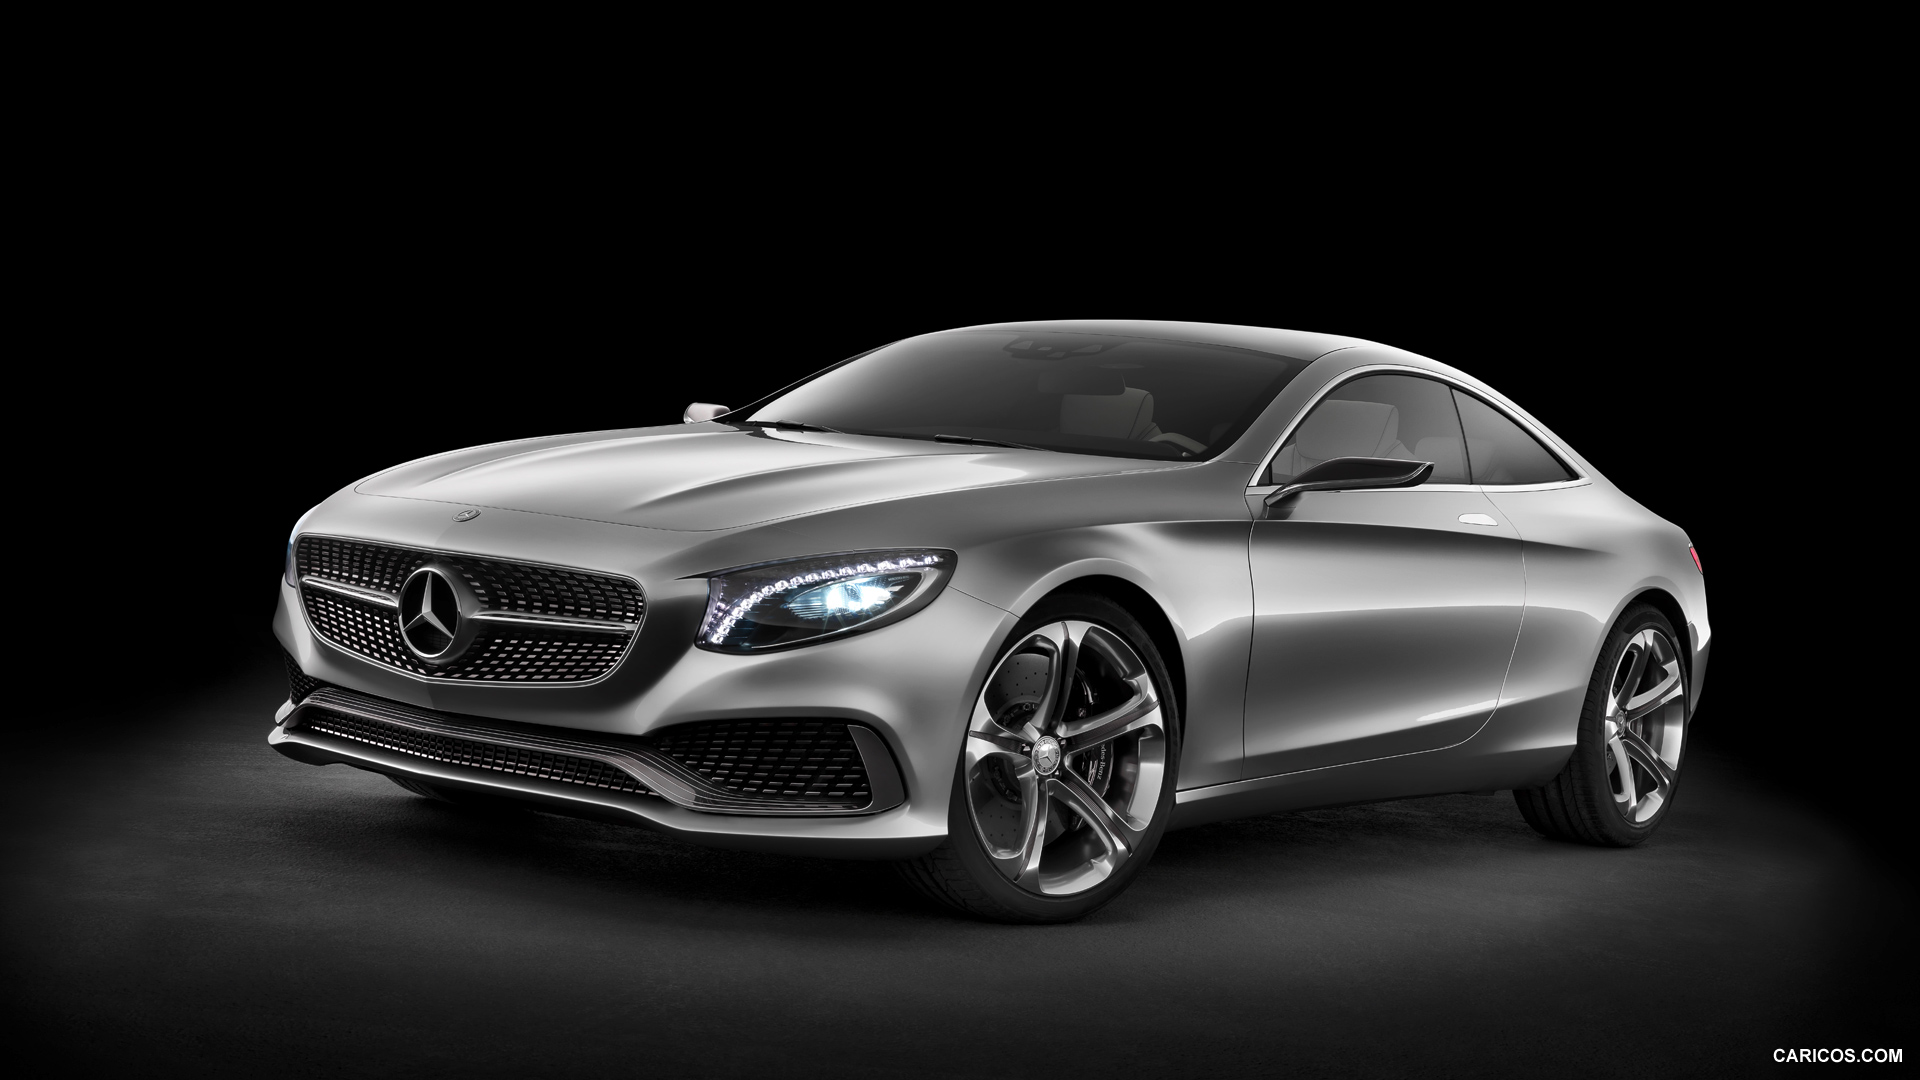 Mercedes-Benz S-Class Coupe Concept (2013)  - Front, #44 of 58